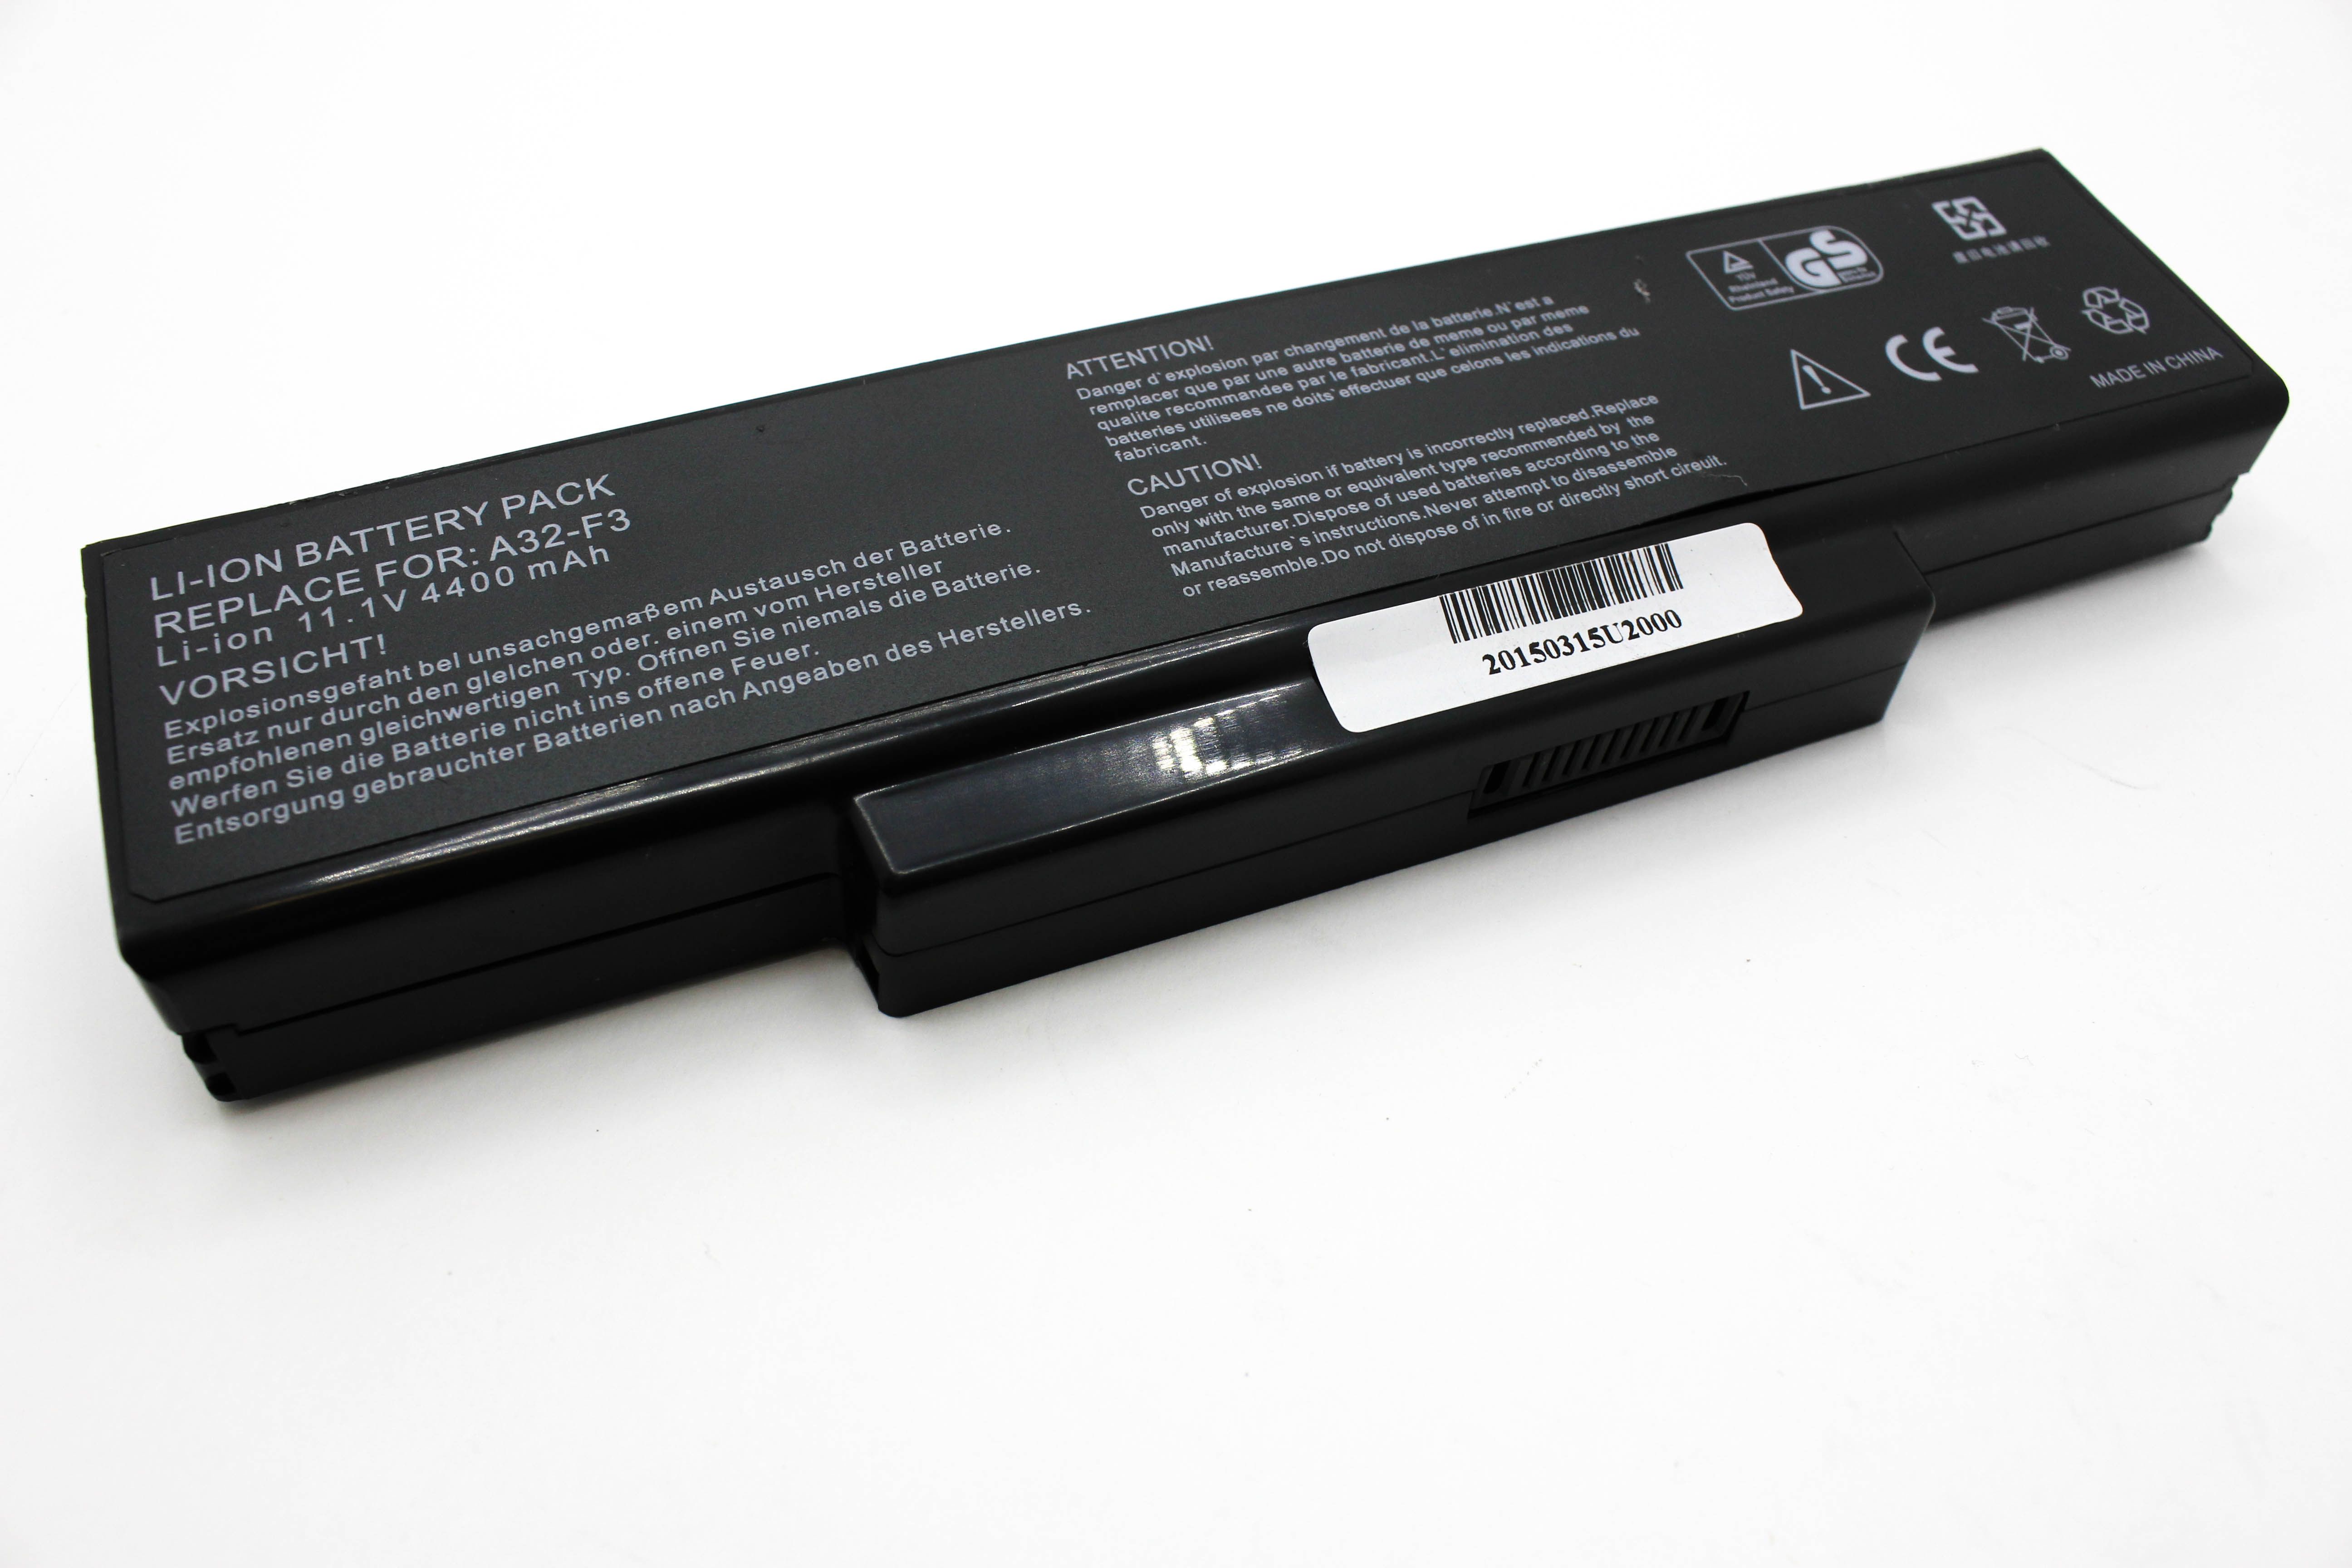 Battery a32. ASUS a32 f3 аккумулятор. Аккумулятор (батарея) для ноутбука ASUS a32-x51 4400mah. Аккумулятор для ASUS a62. .Батарейки для ноутбука ASUS a32.